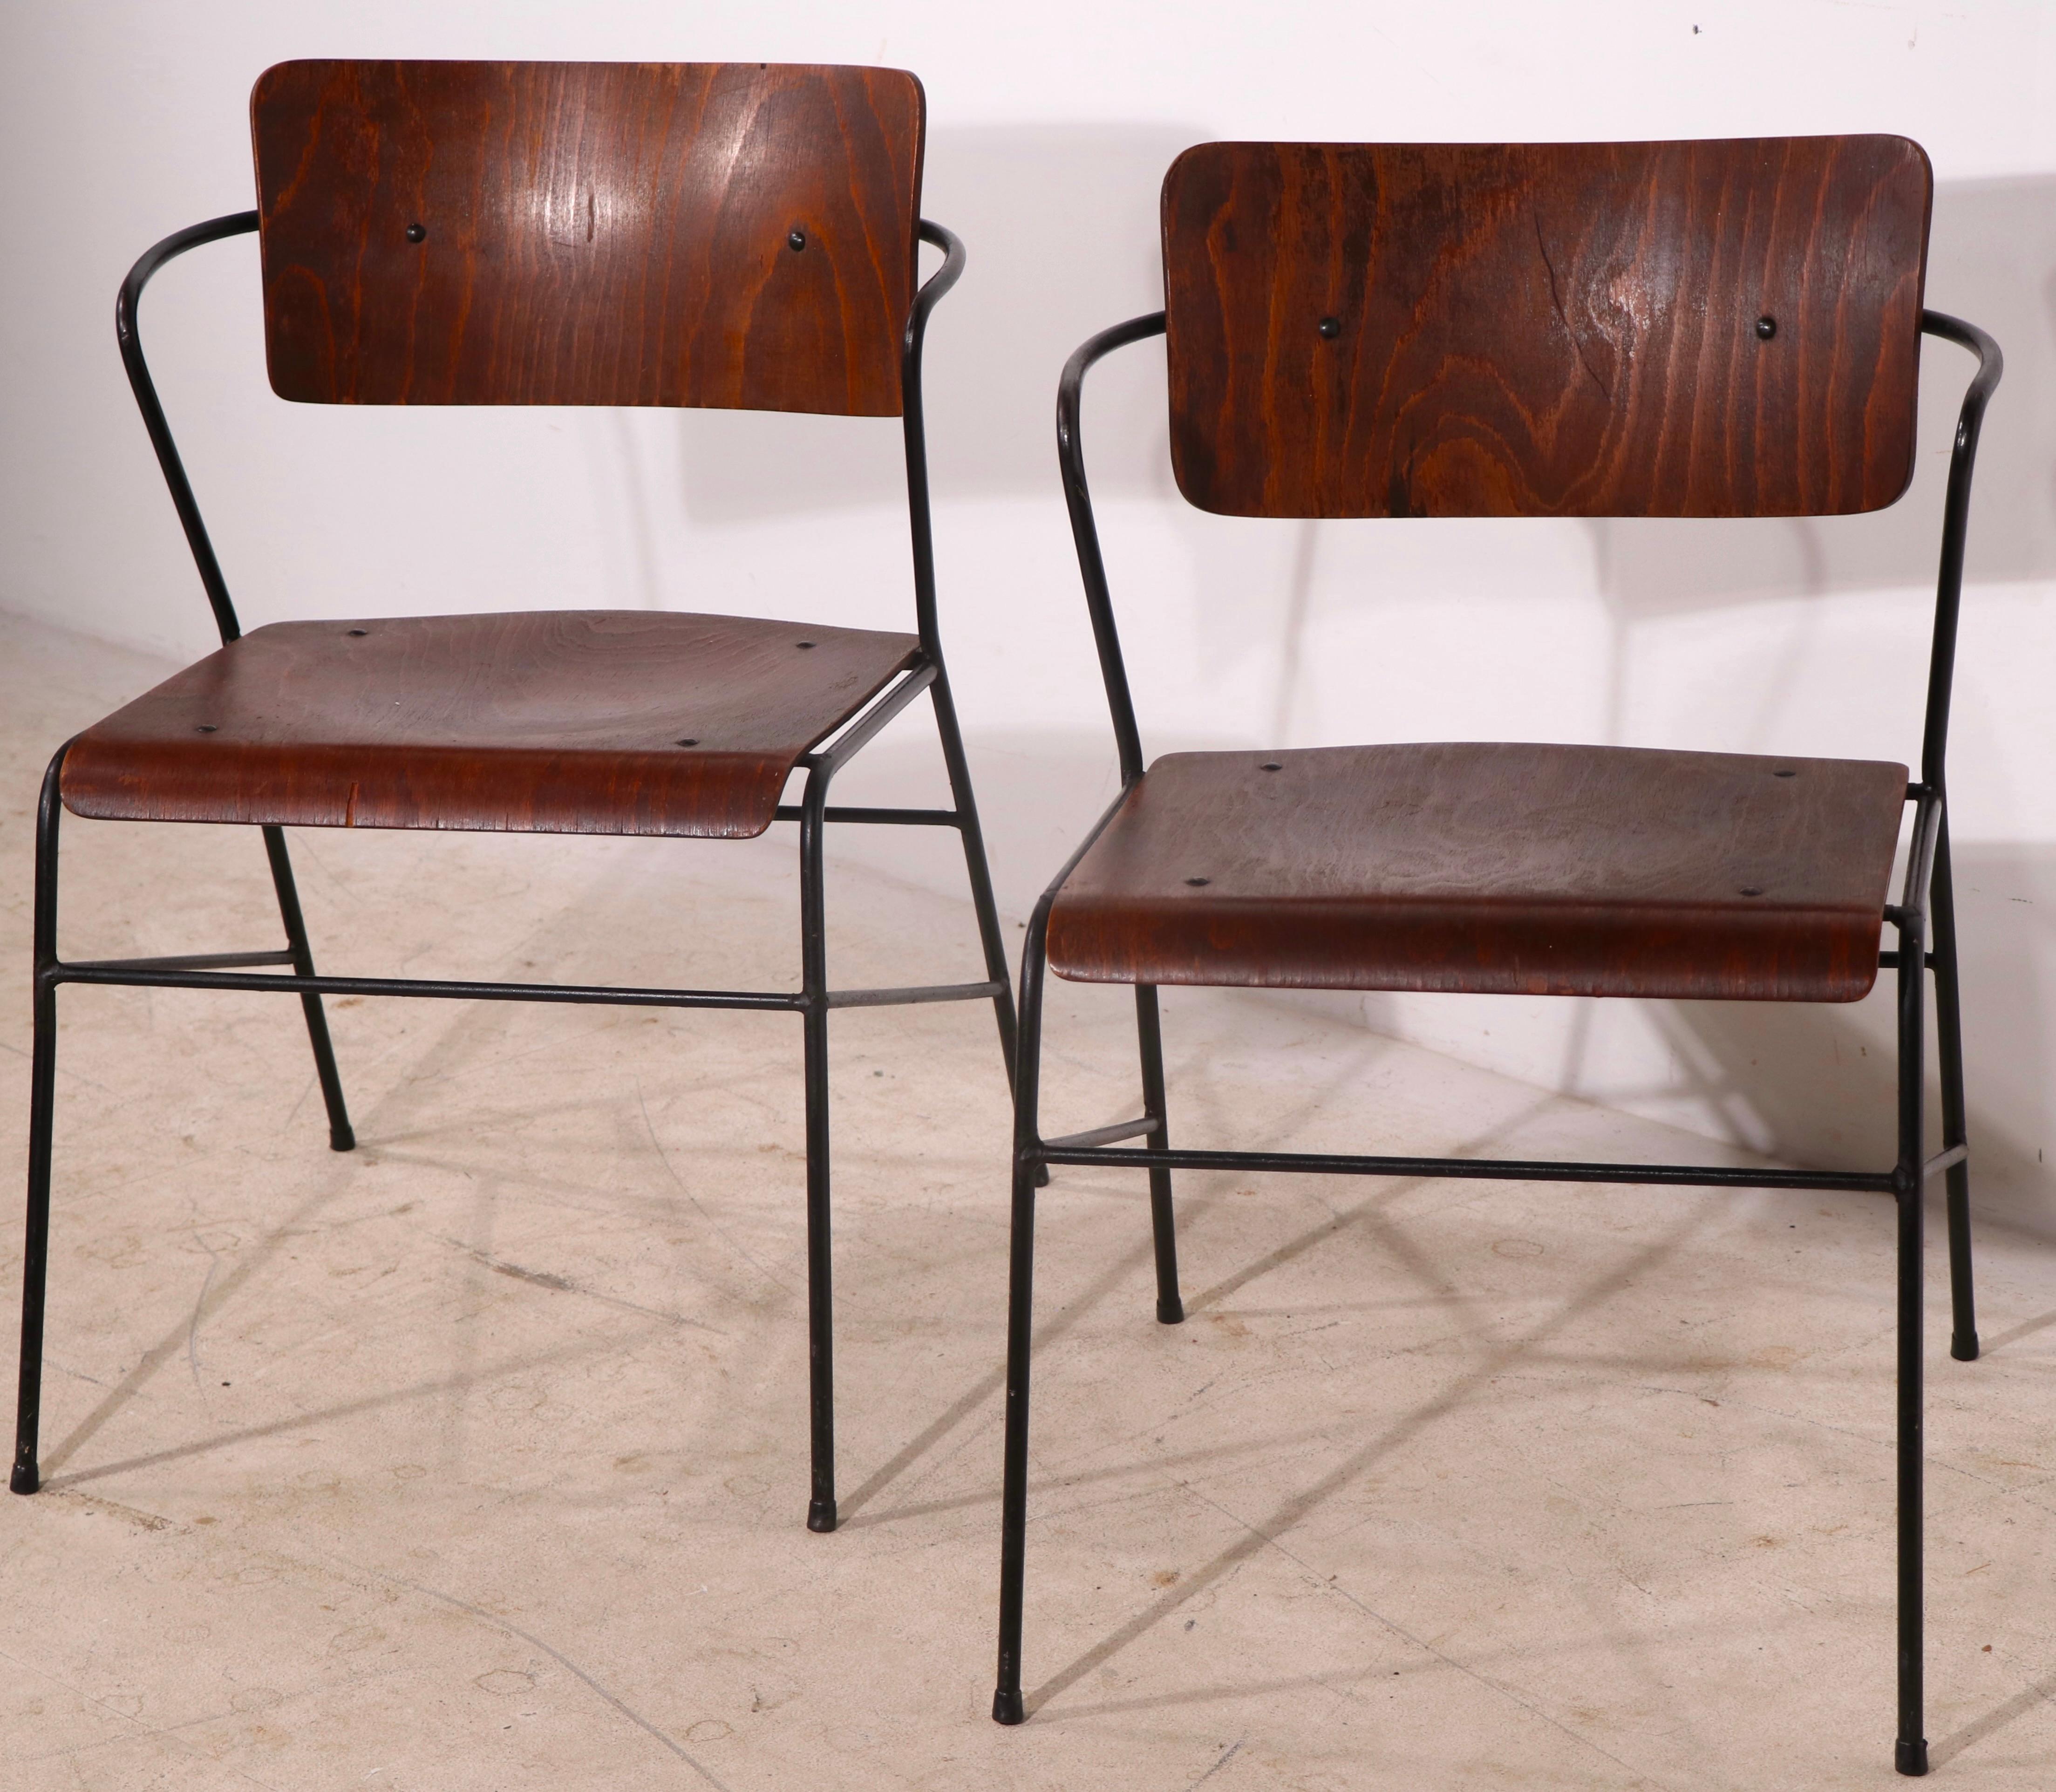 Chic architectural pair of mid century dining height arm chairs, having wrought iron frames with formed plywood seats and backs. Both chairs are structurally sound and sturdy, both show some cosmetic wear normal and consistent with age.